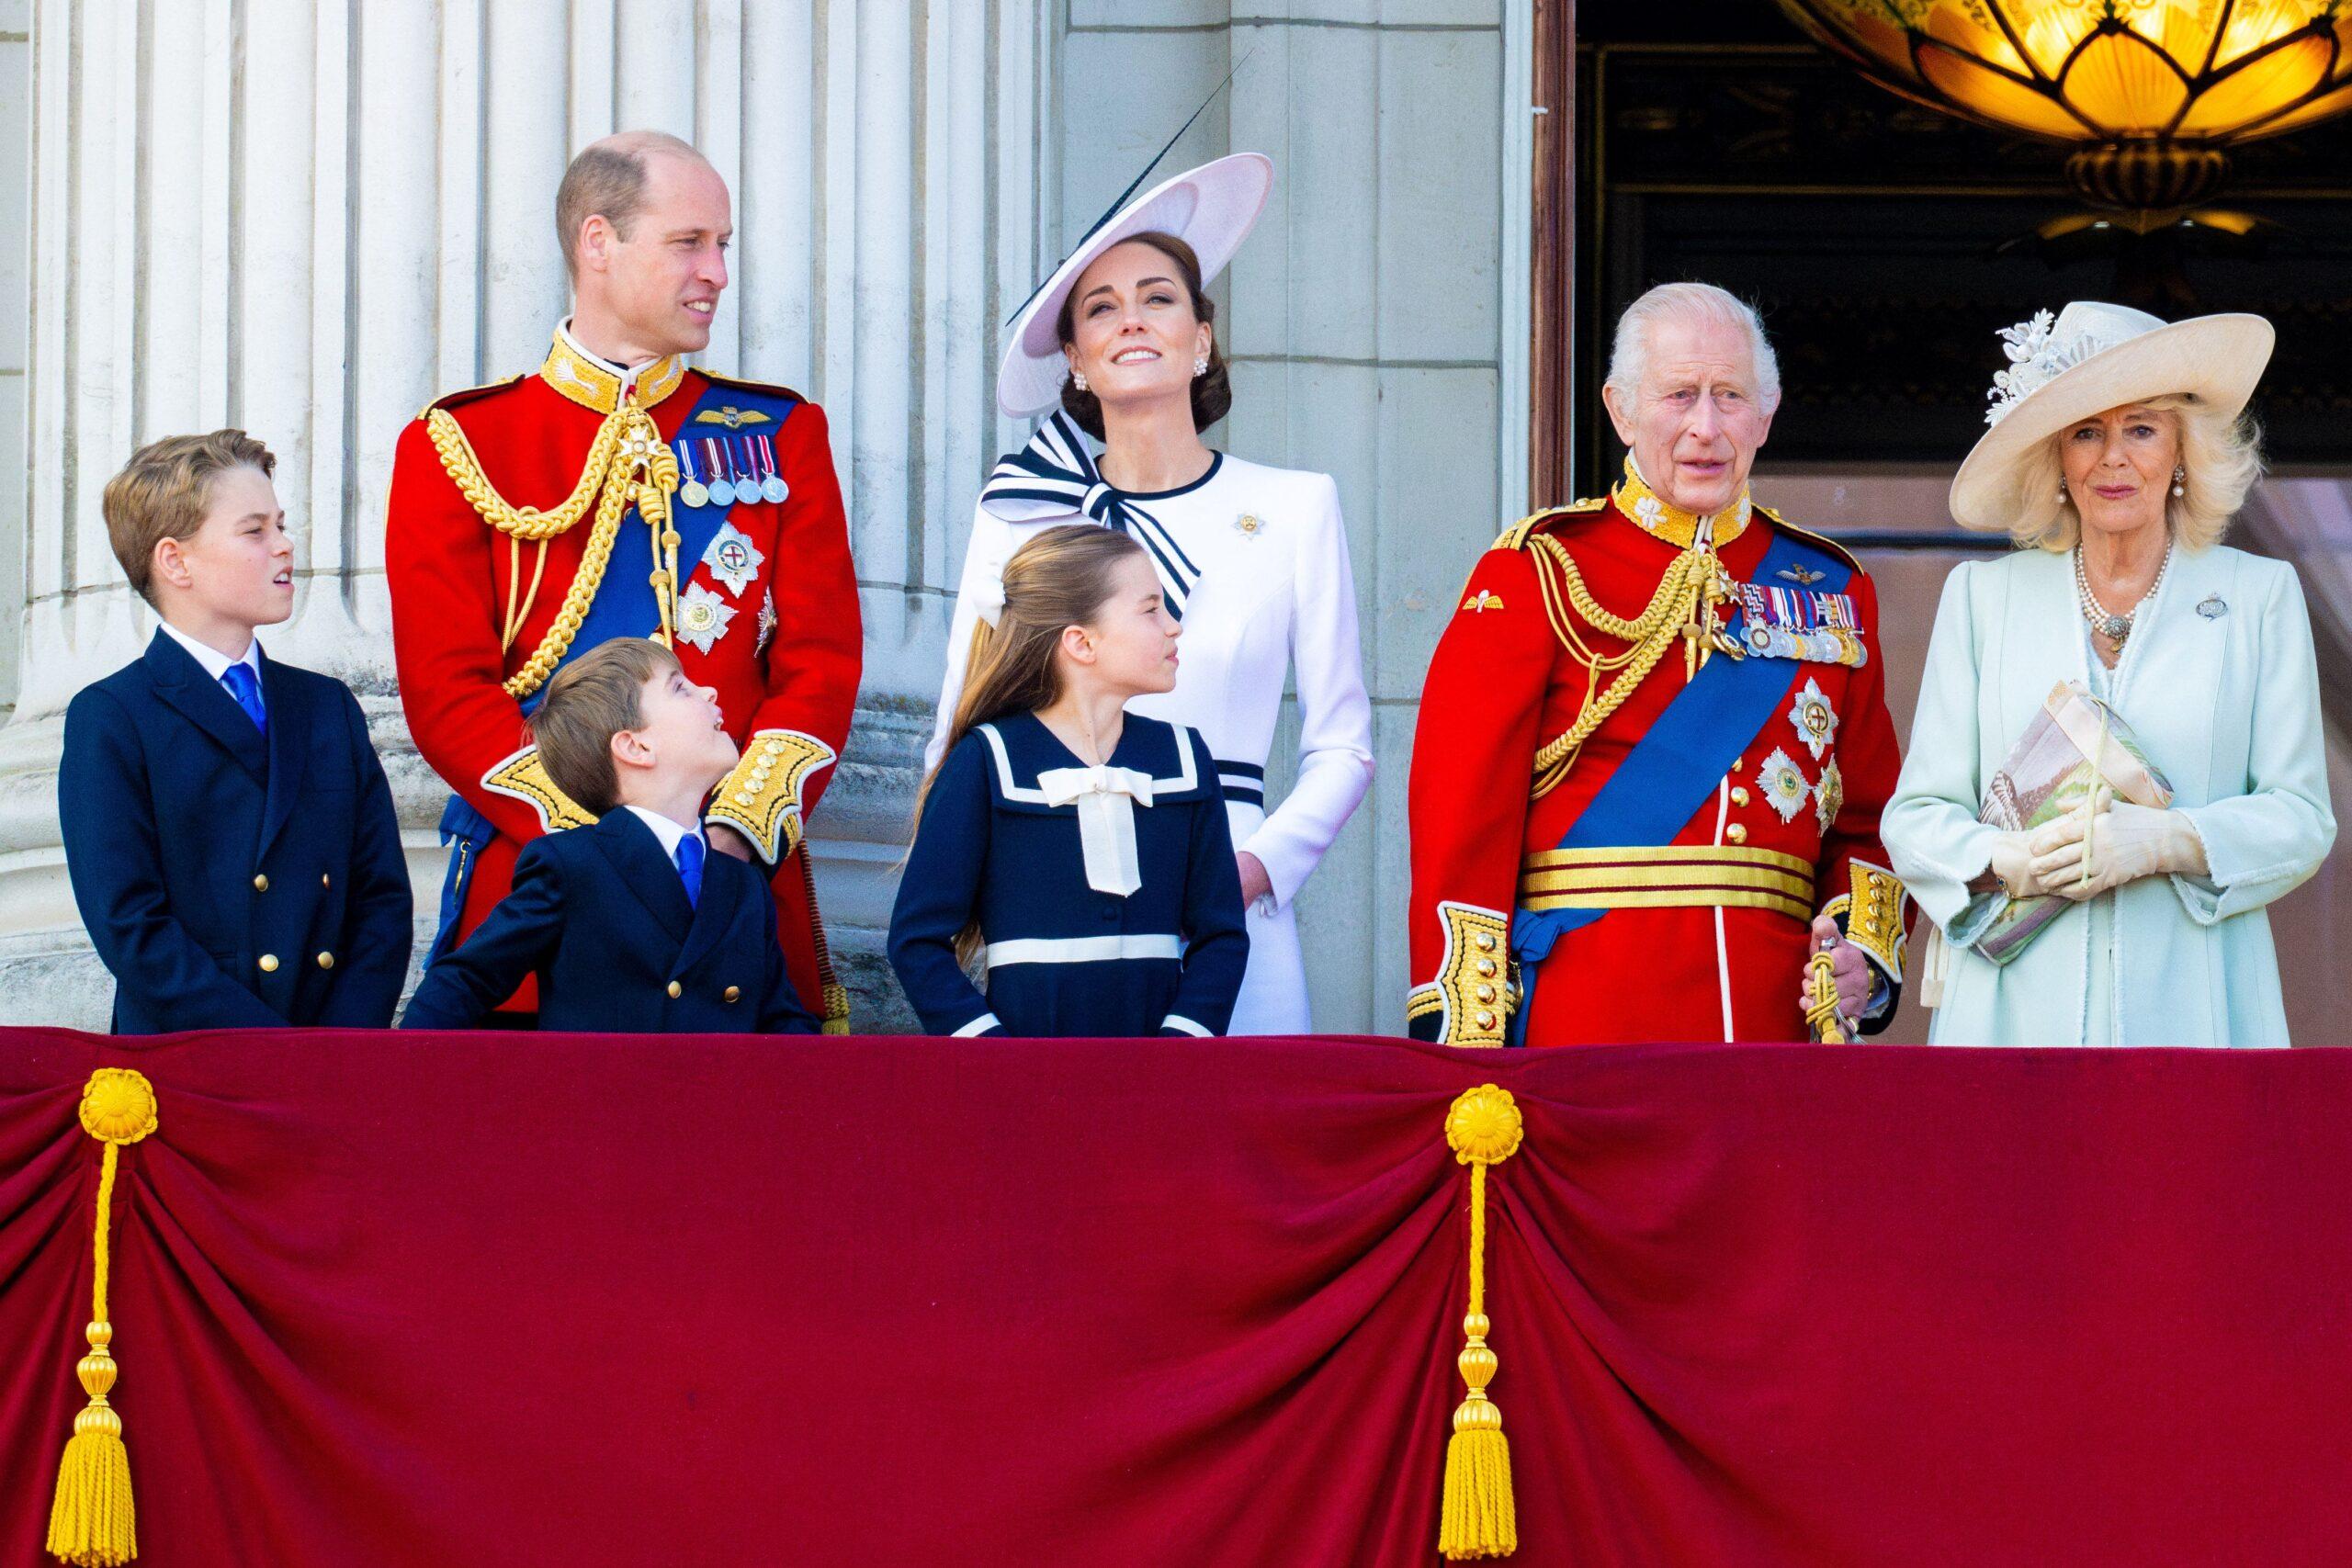 Prince William of Wales, Catherine Princess of Wales, Prince George, Princess Charlotte, Prince Louis during appearance on the Buckingham Palace balcony to watch the flypast during Trooping the Colour 2024 ceremony.